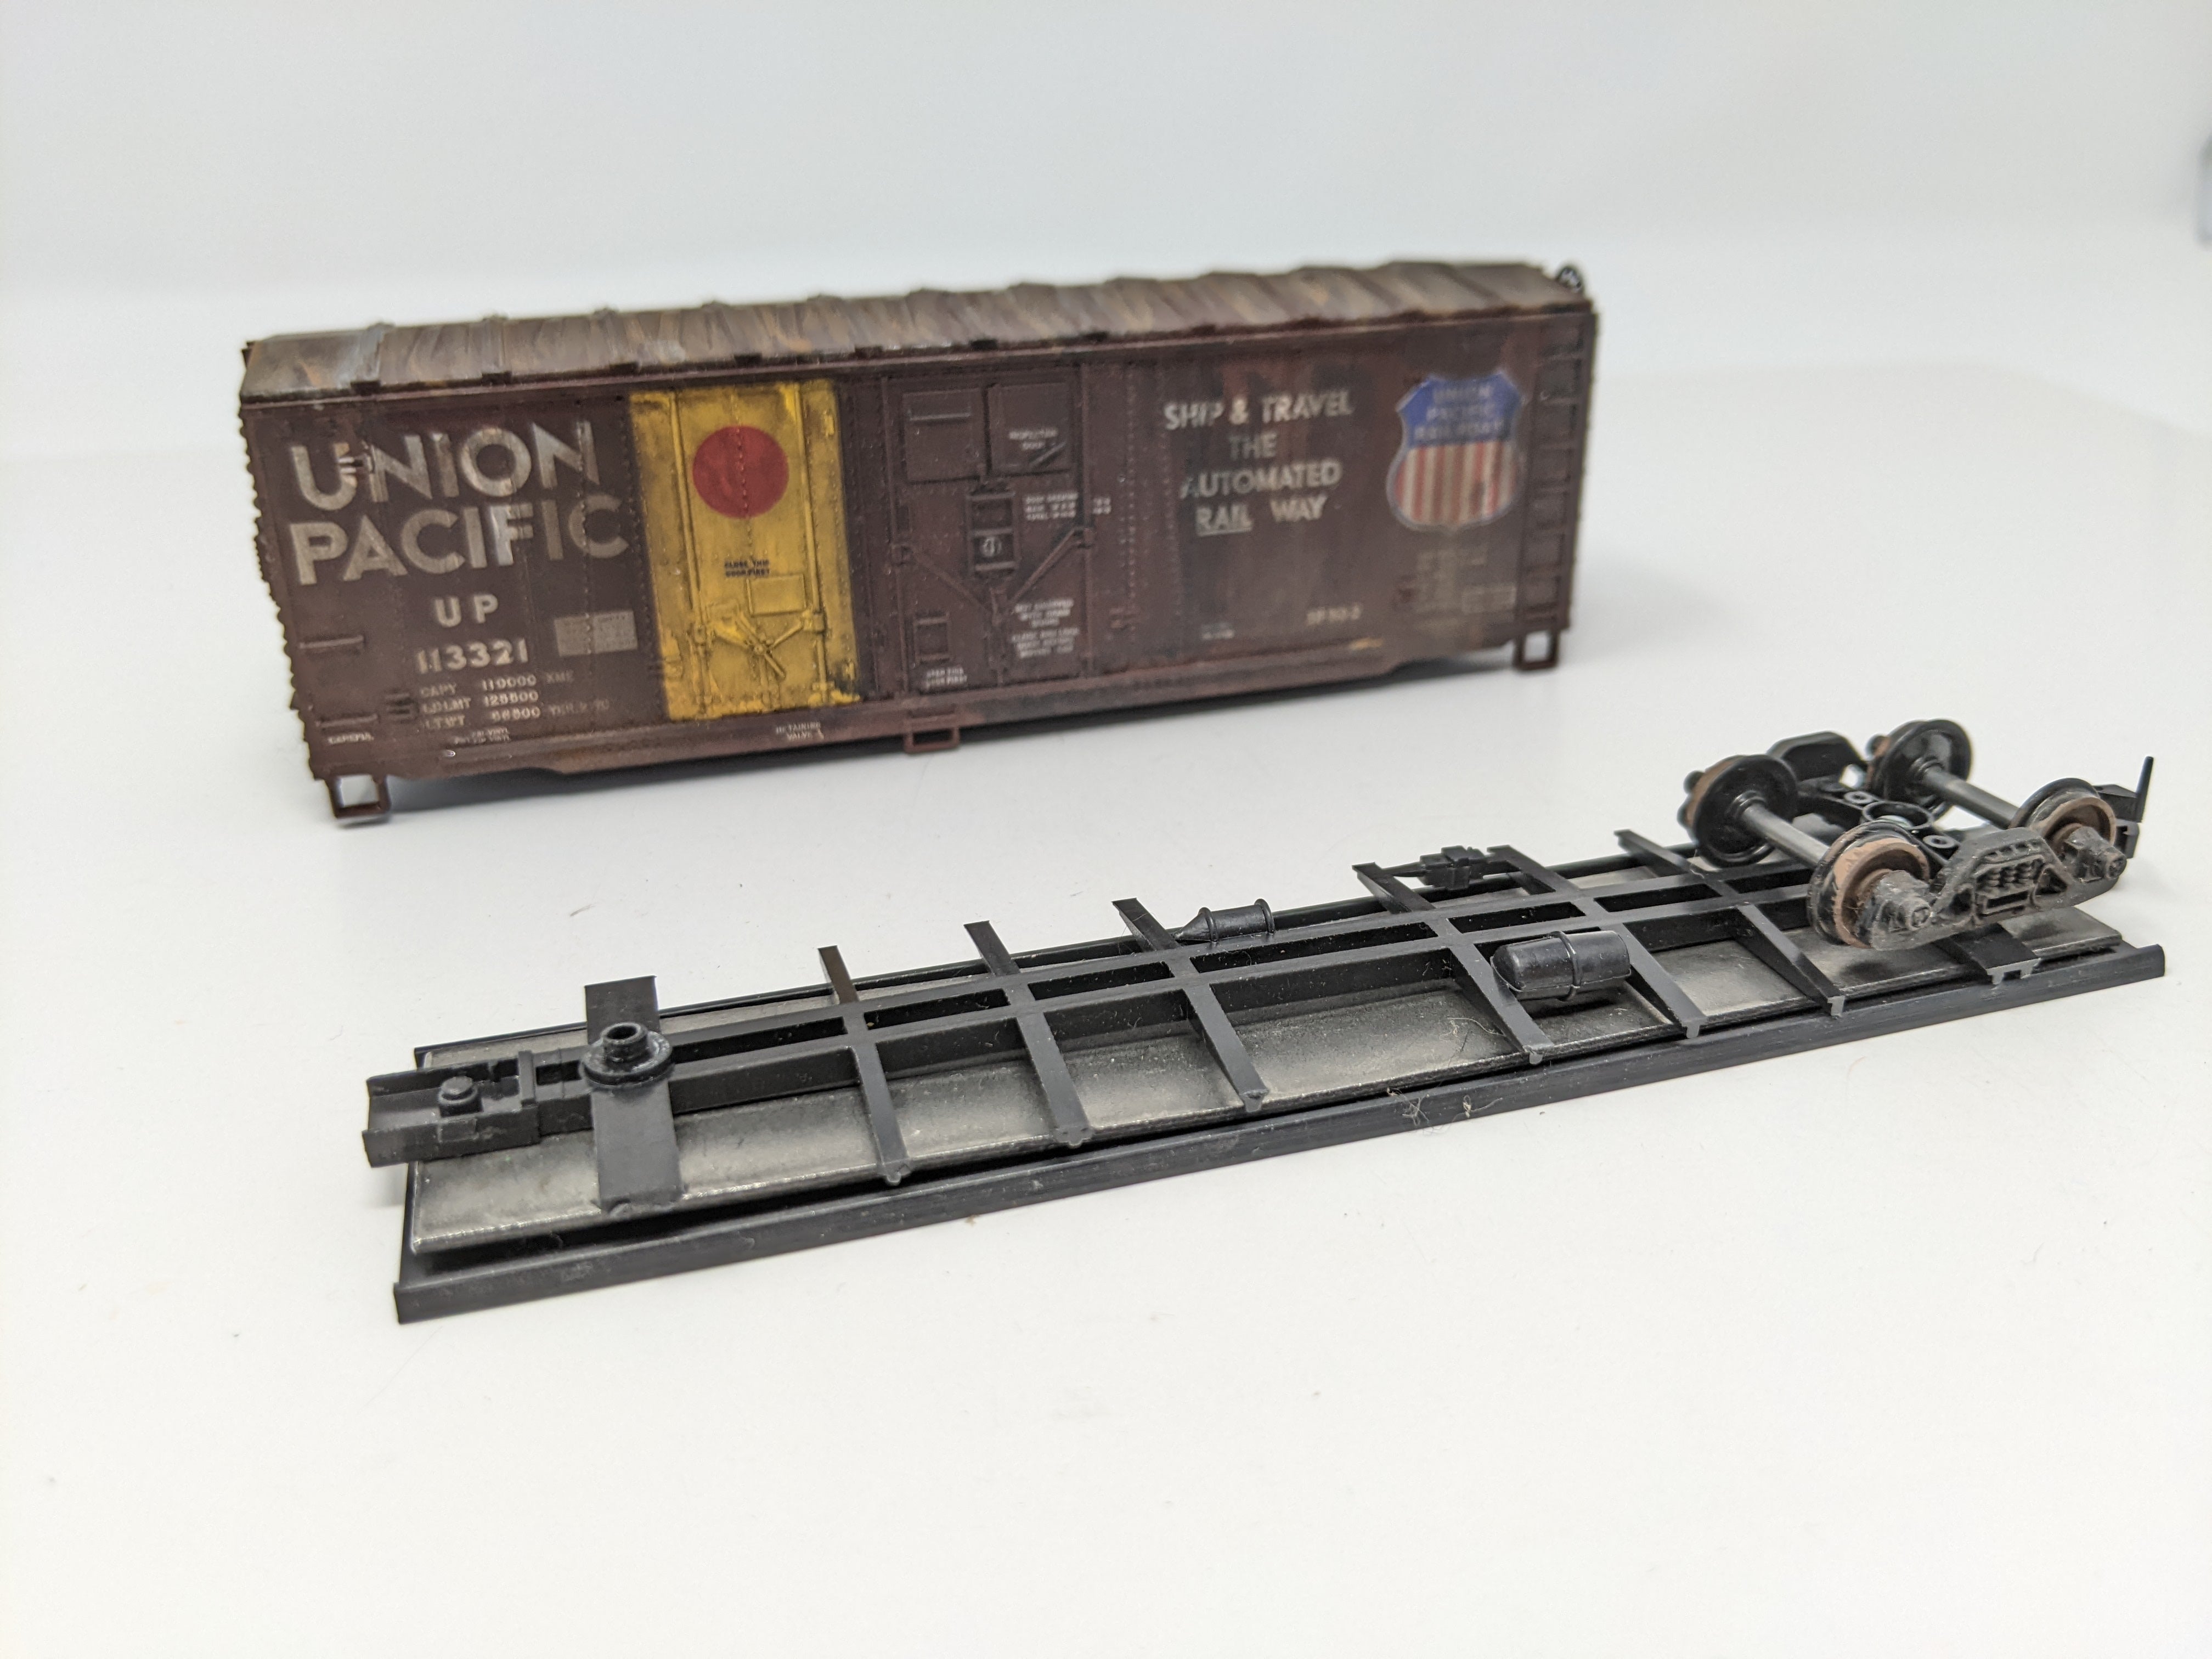 USED Athearn HO Scale, Weathered 40' Box Car, Union Pacific UP #113321, Read Description